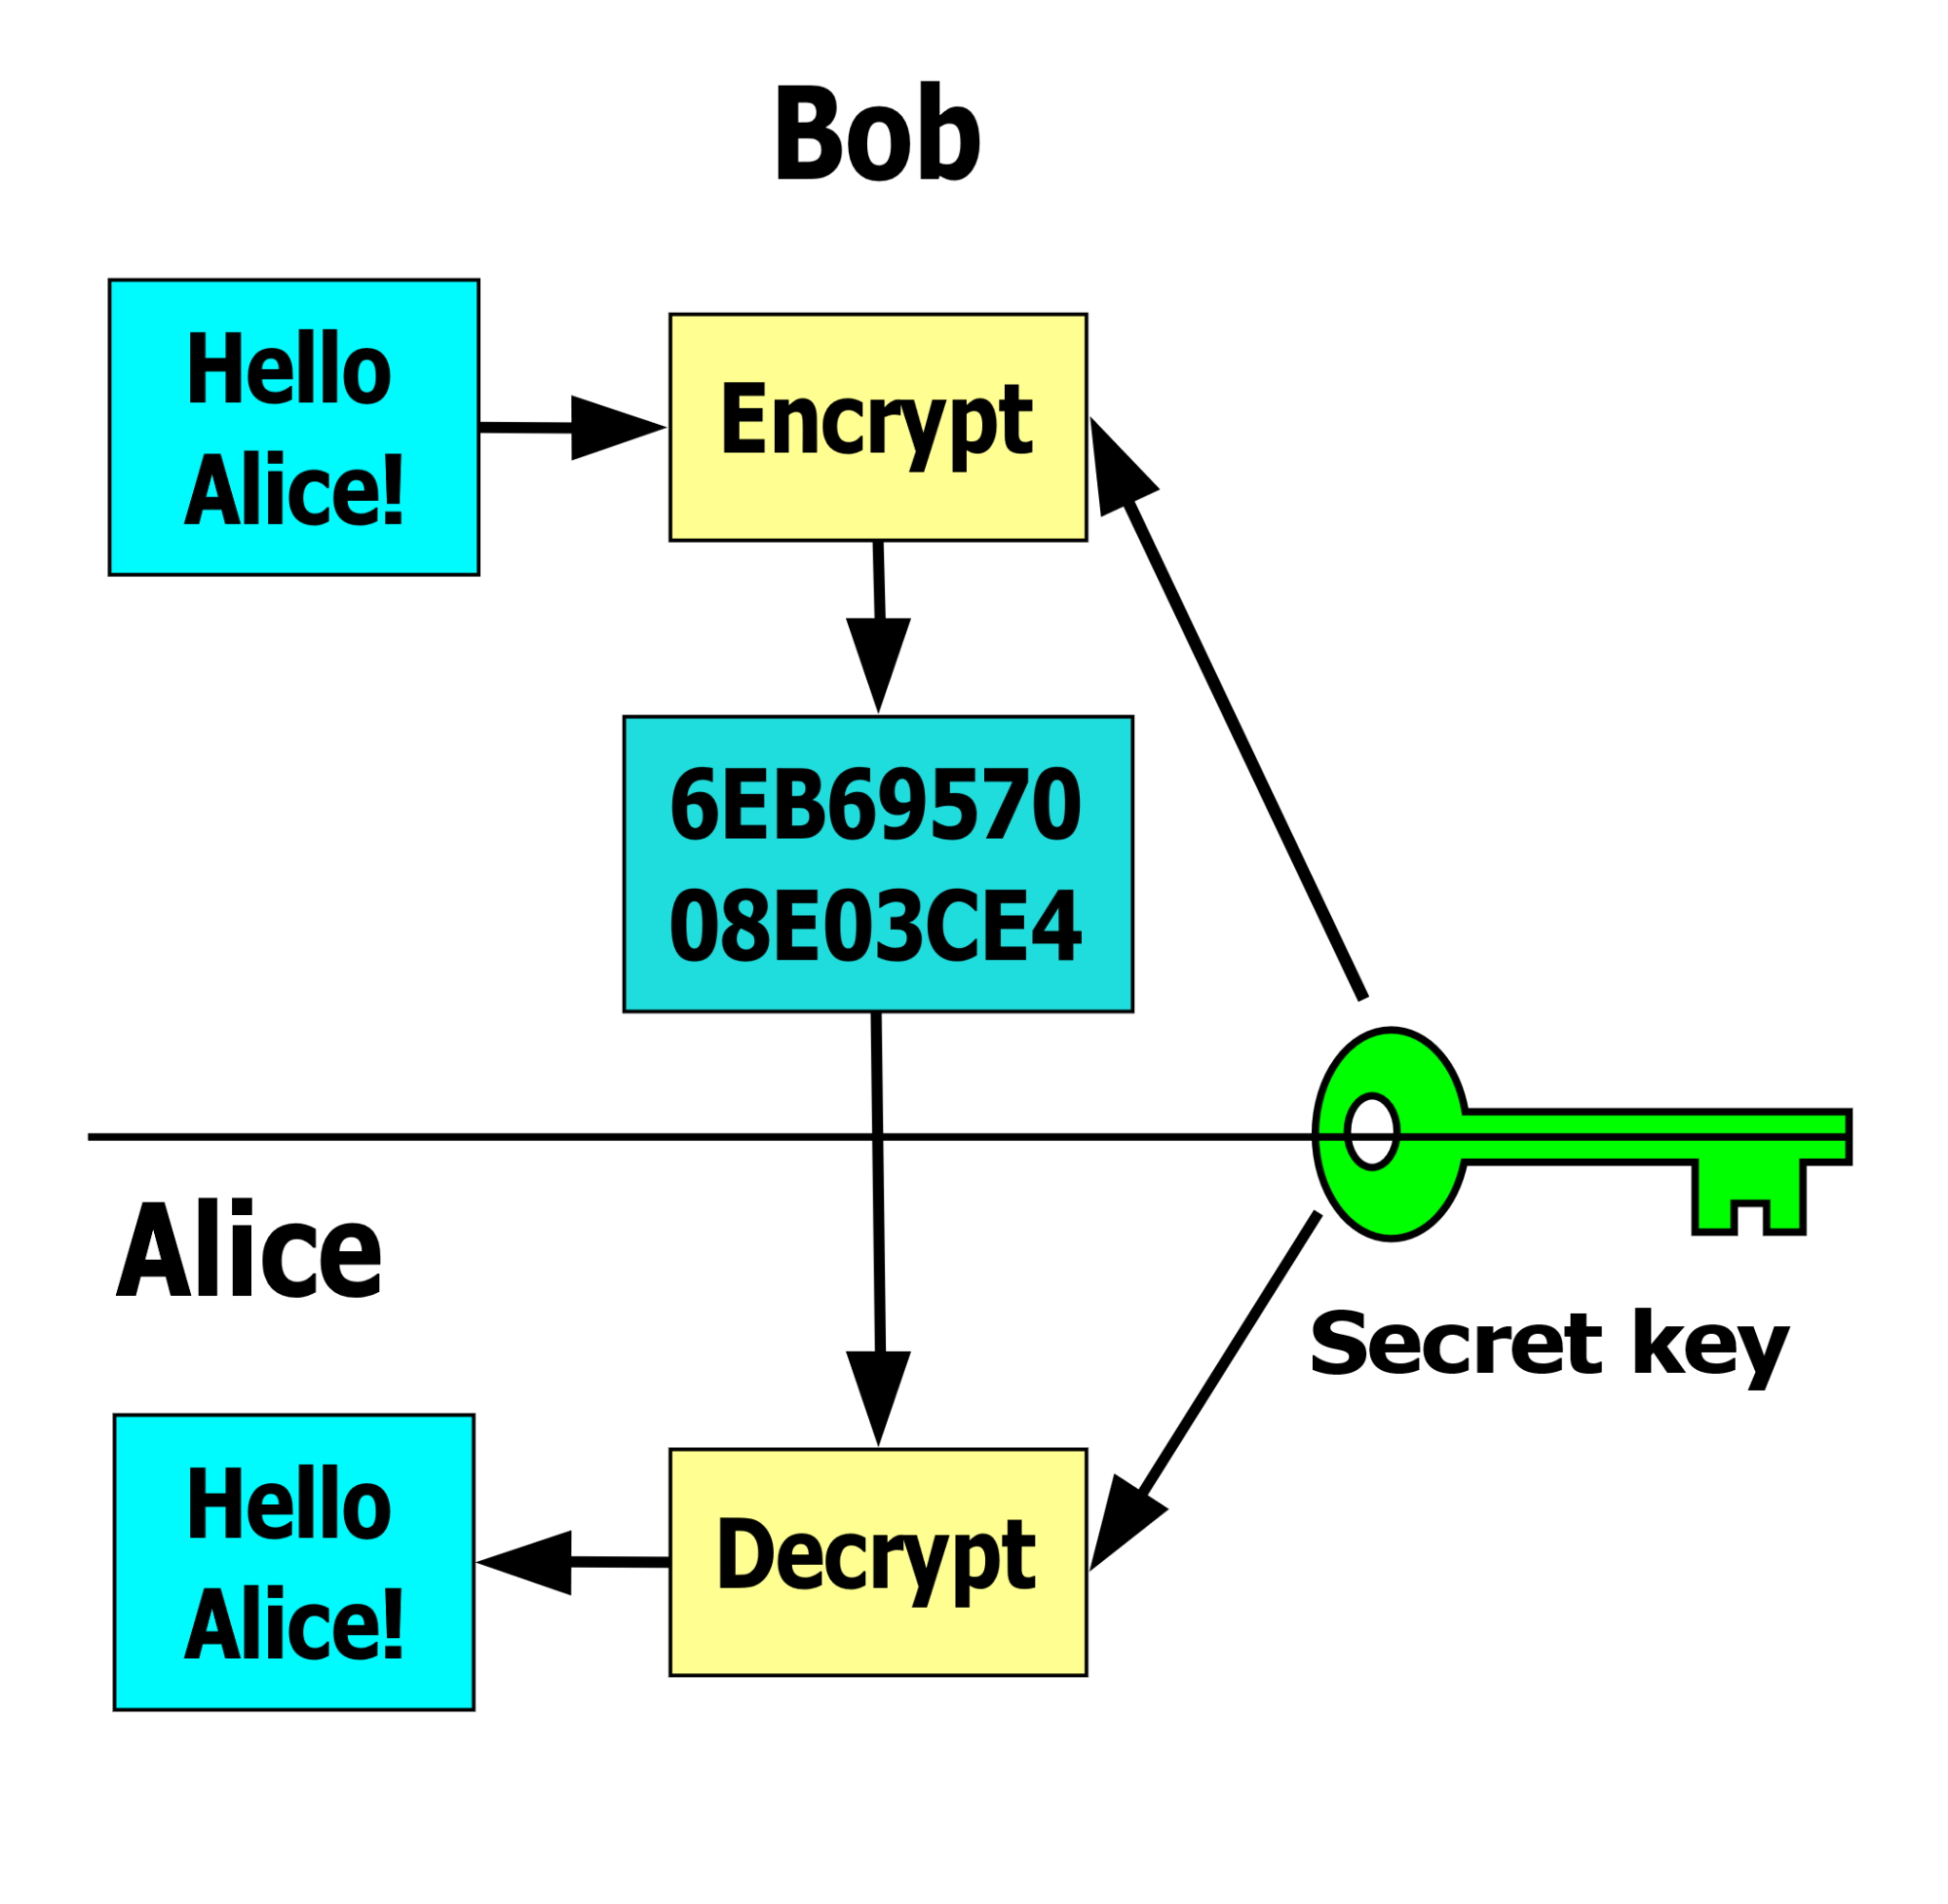 a diagram showing the flow of encryption from Bob to Alice, and then decrypt to get to Alice